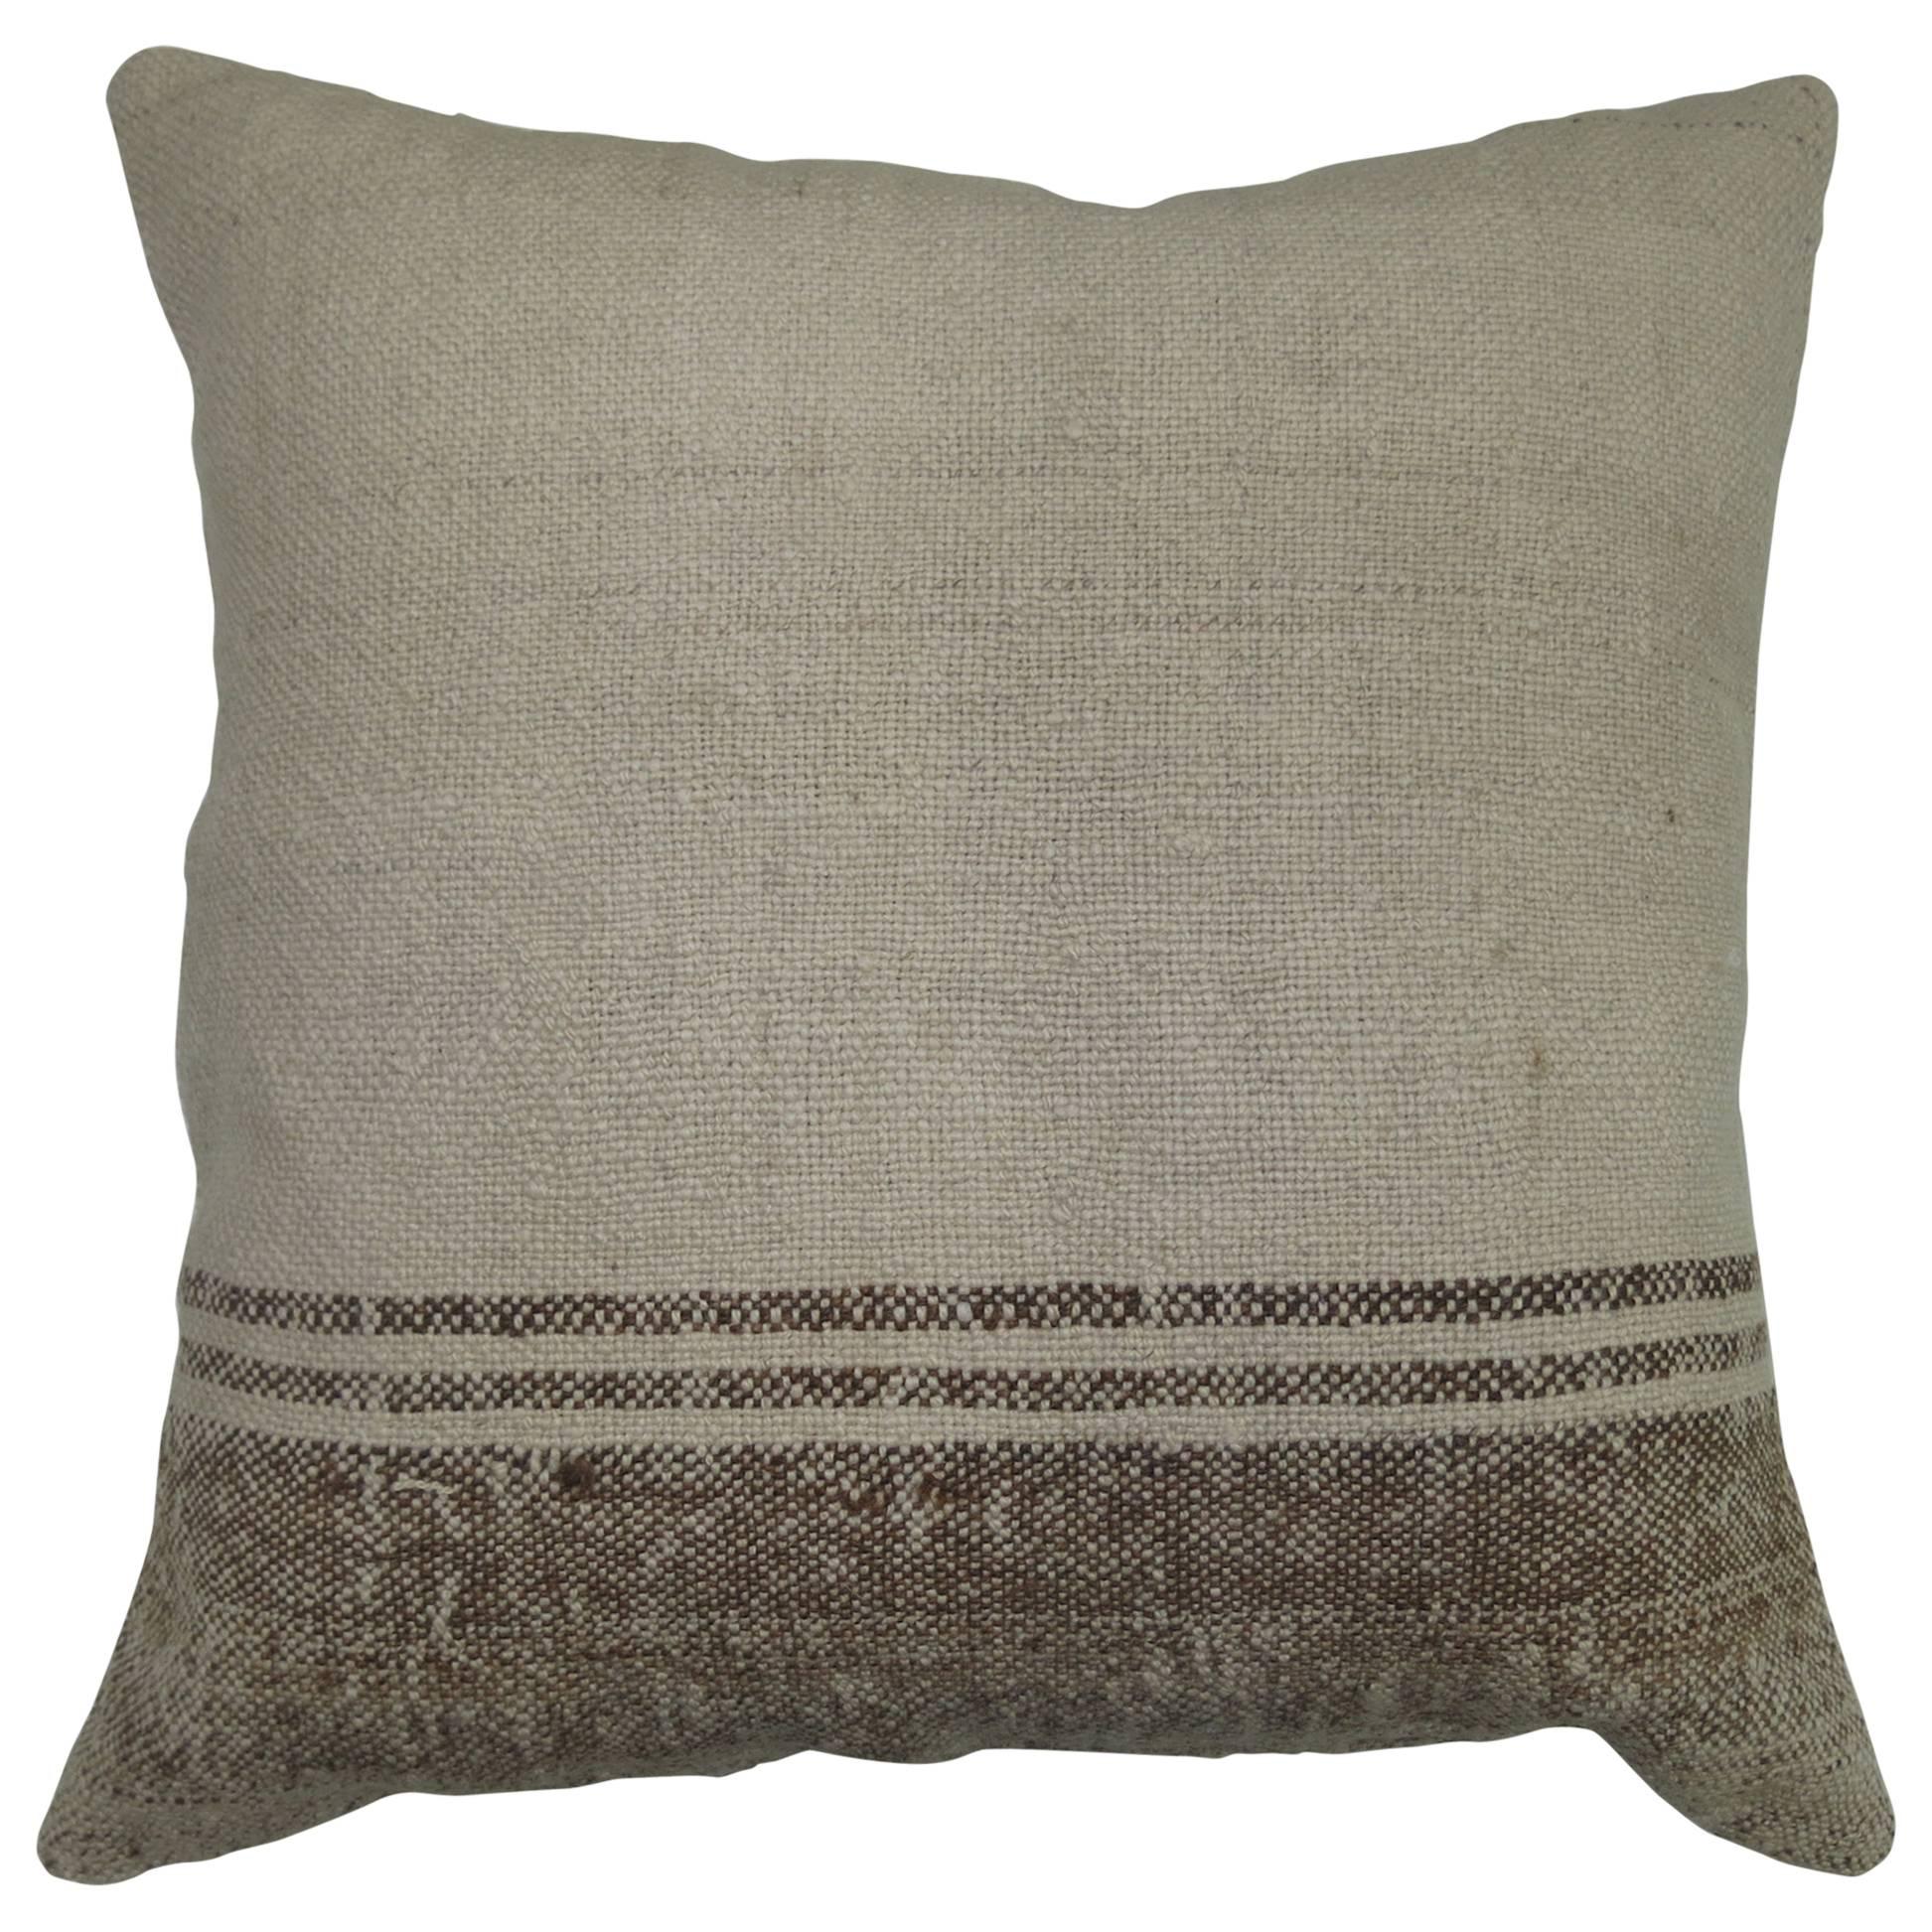 Ivory and Brown Vintage Kilim Pillow